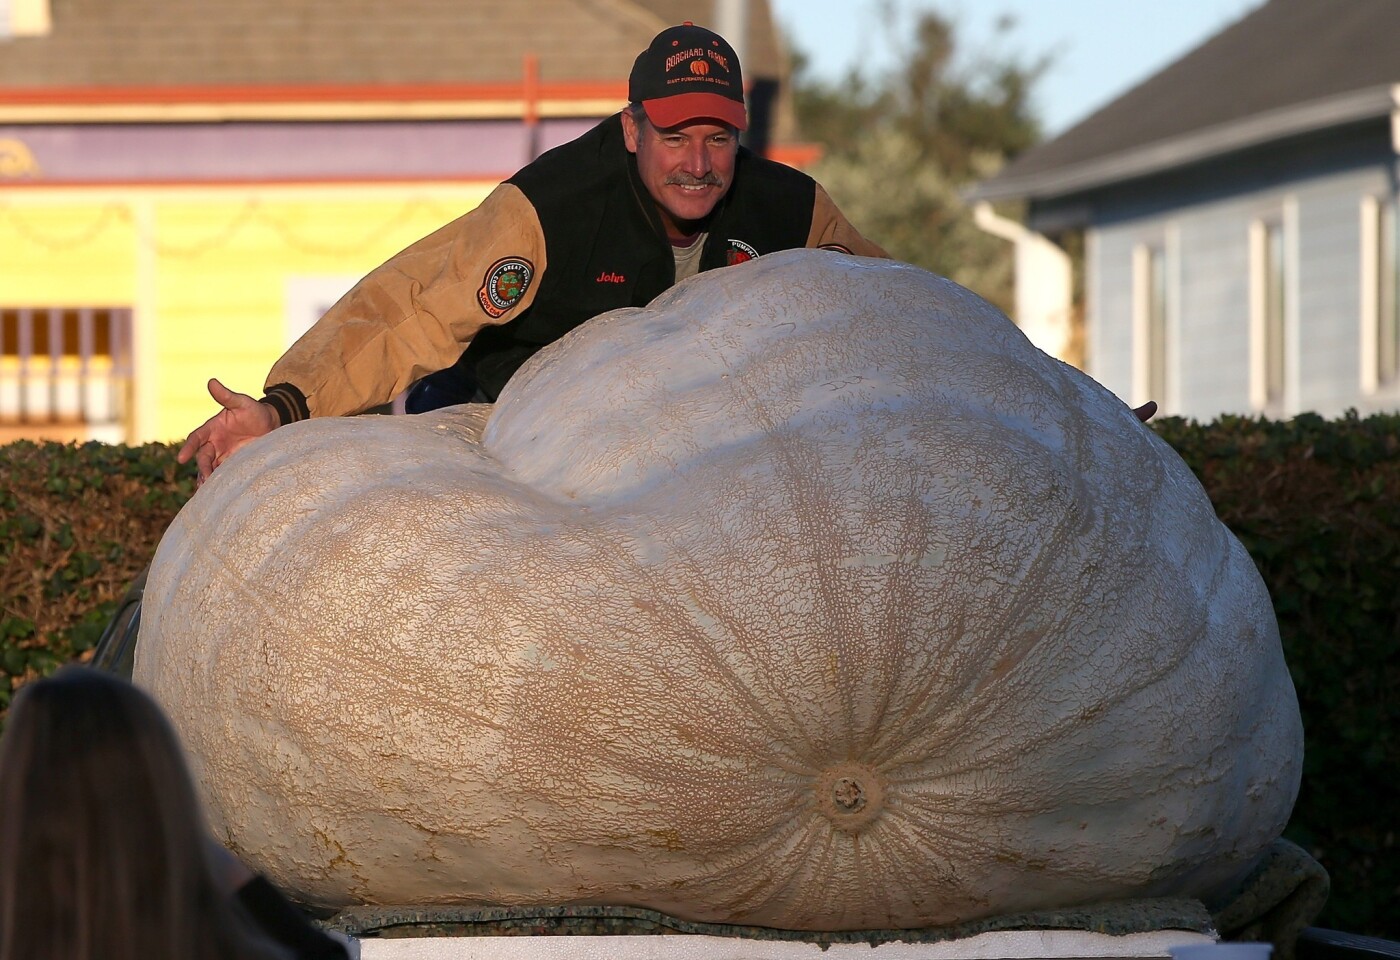 World's heaviest pumpkin, grown in Napa Valley, weighs more than 2,000